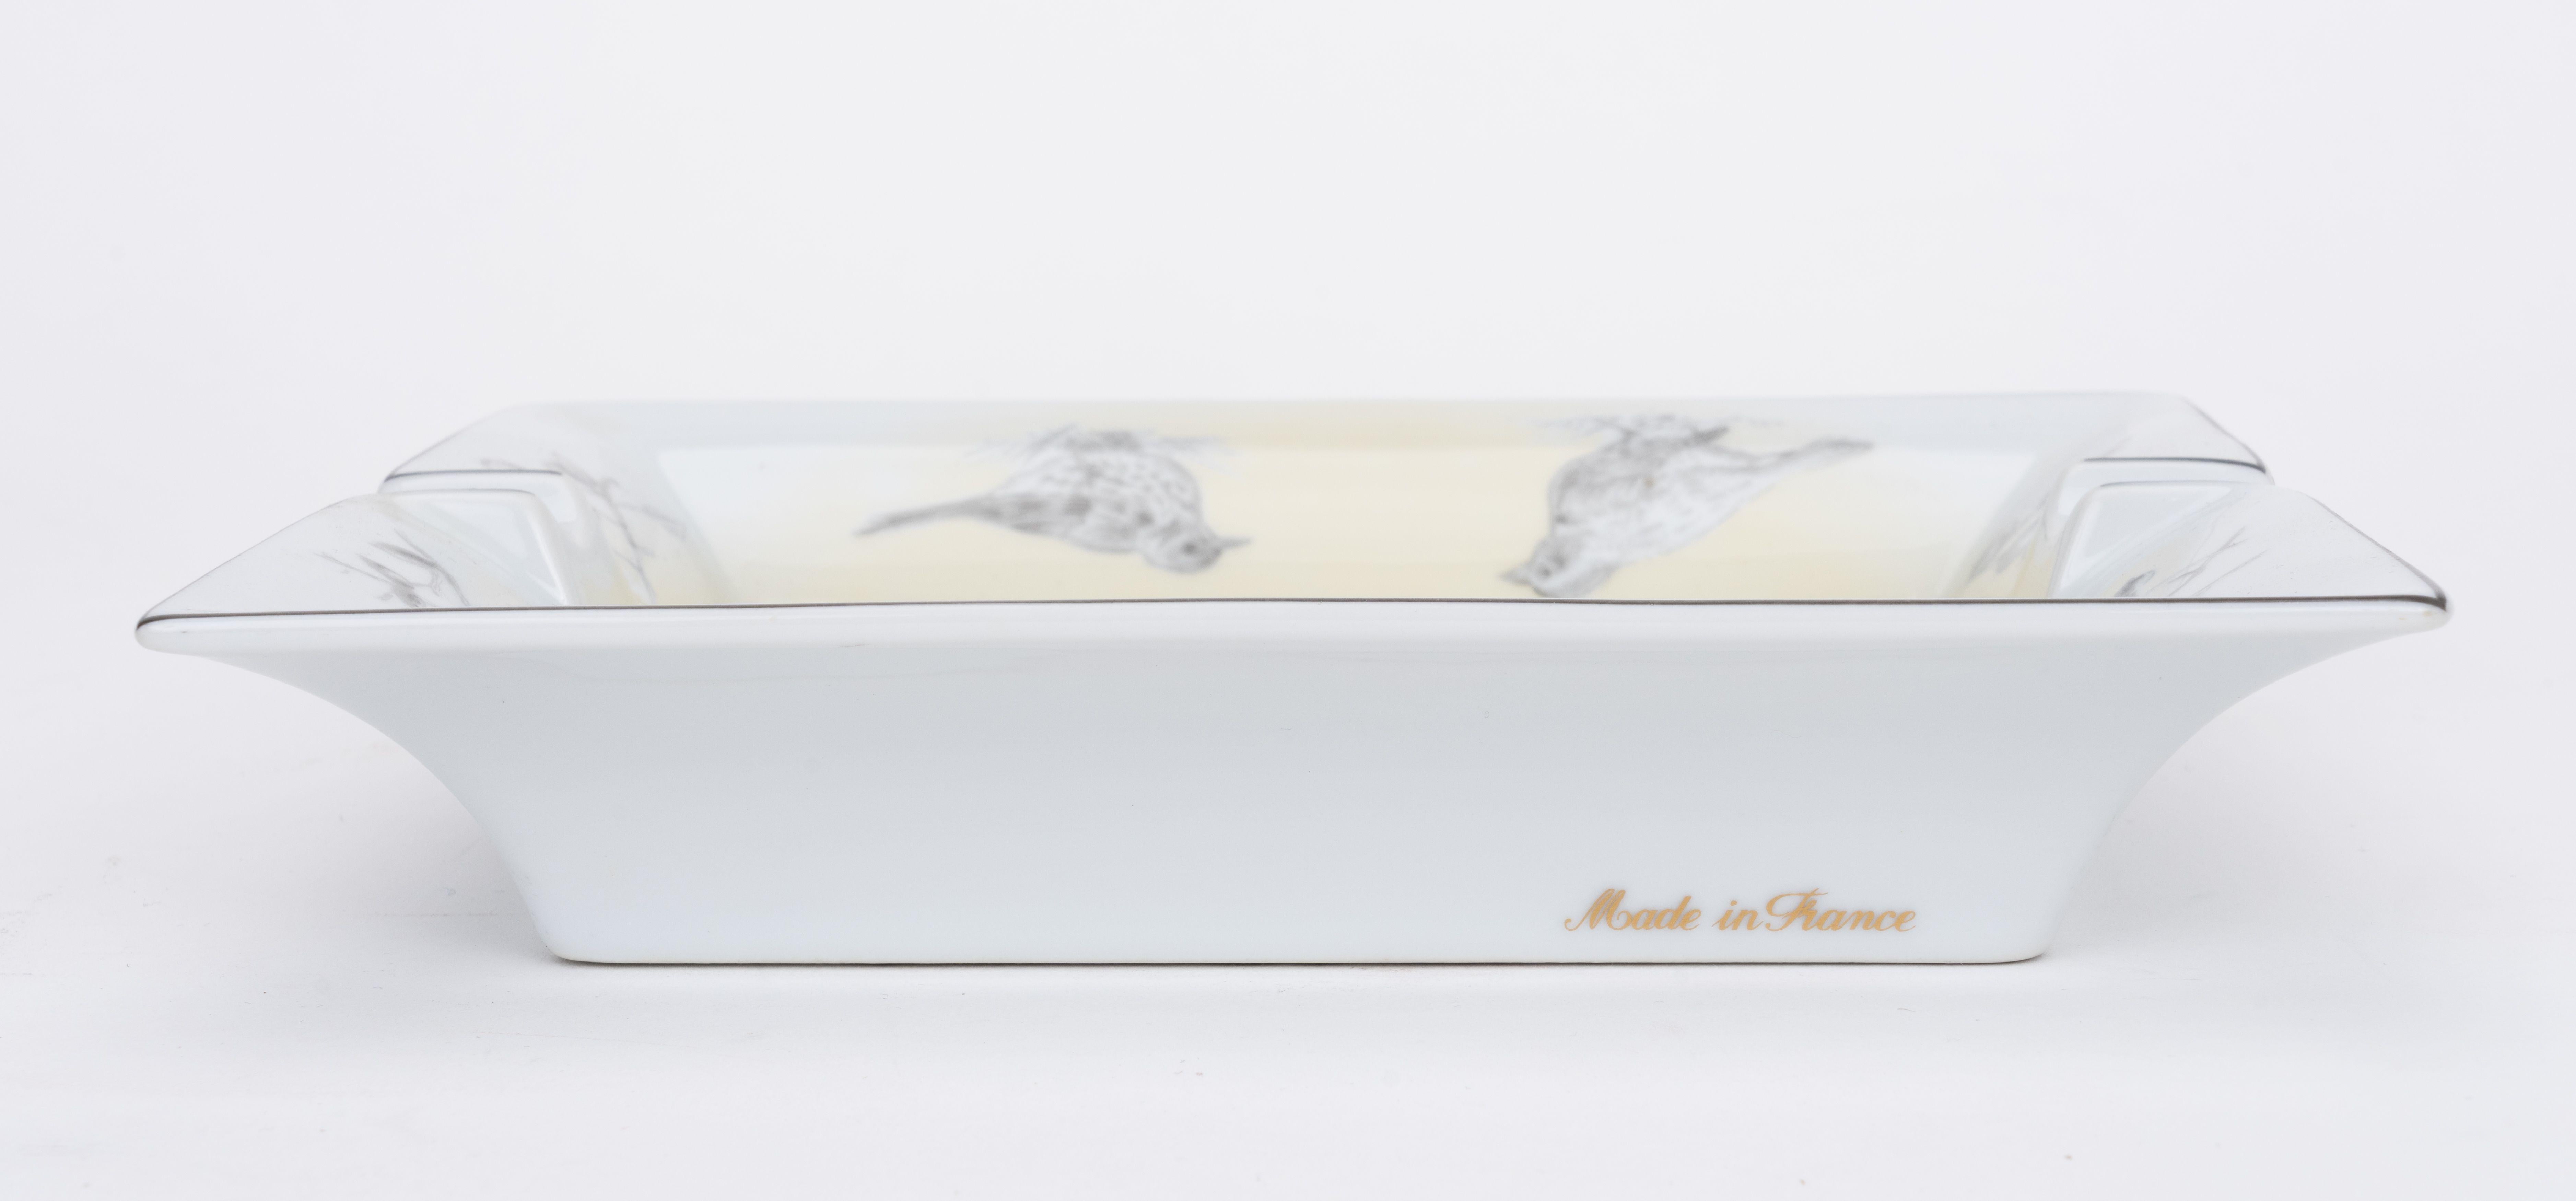 Hermès Porcelain Wild Birds Ashtray In Excellent Condition For Sale In West Hollywood, CA